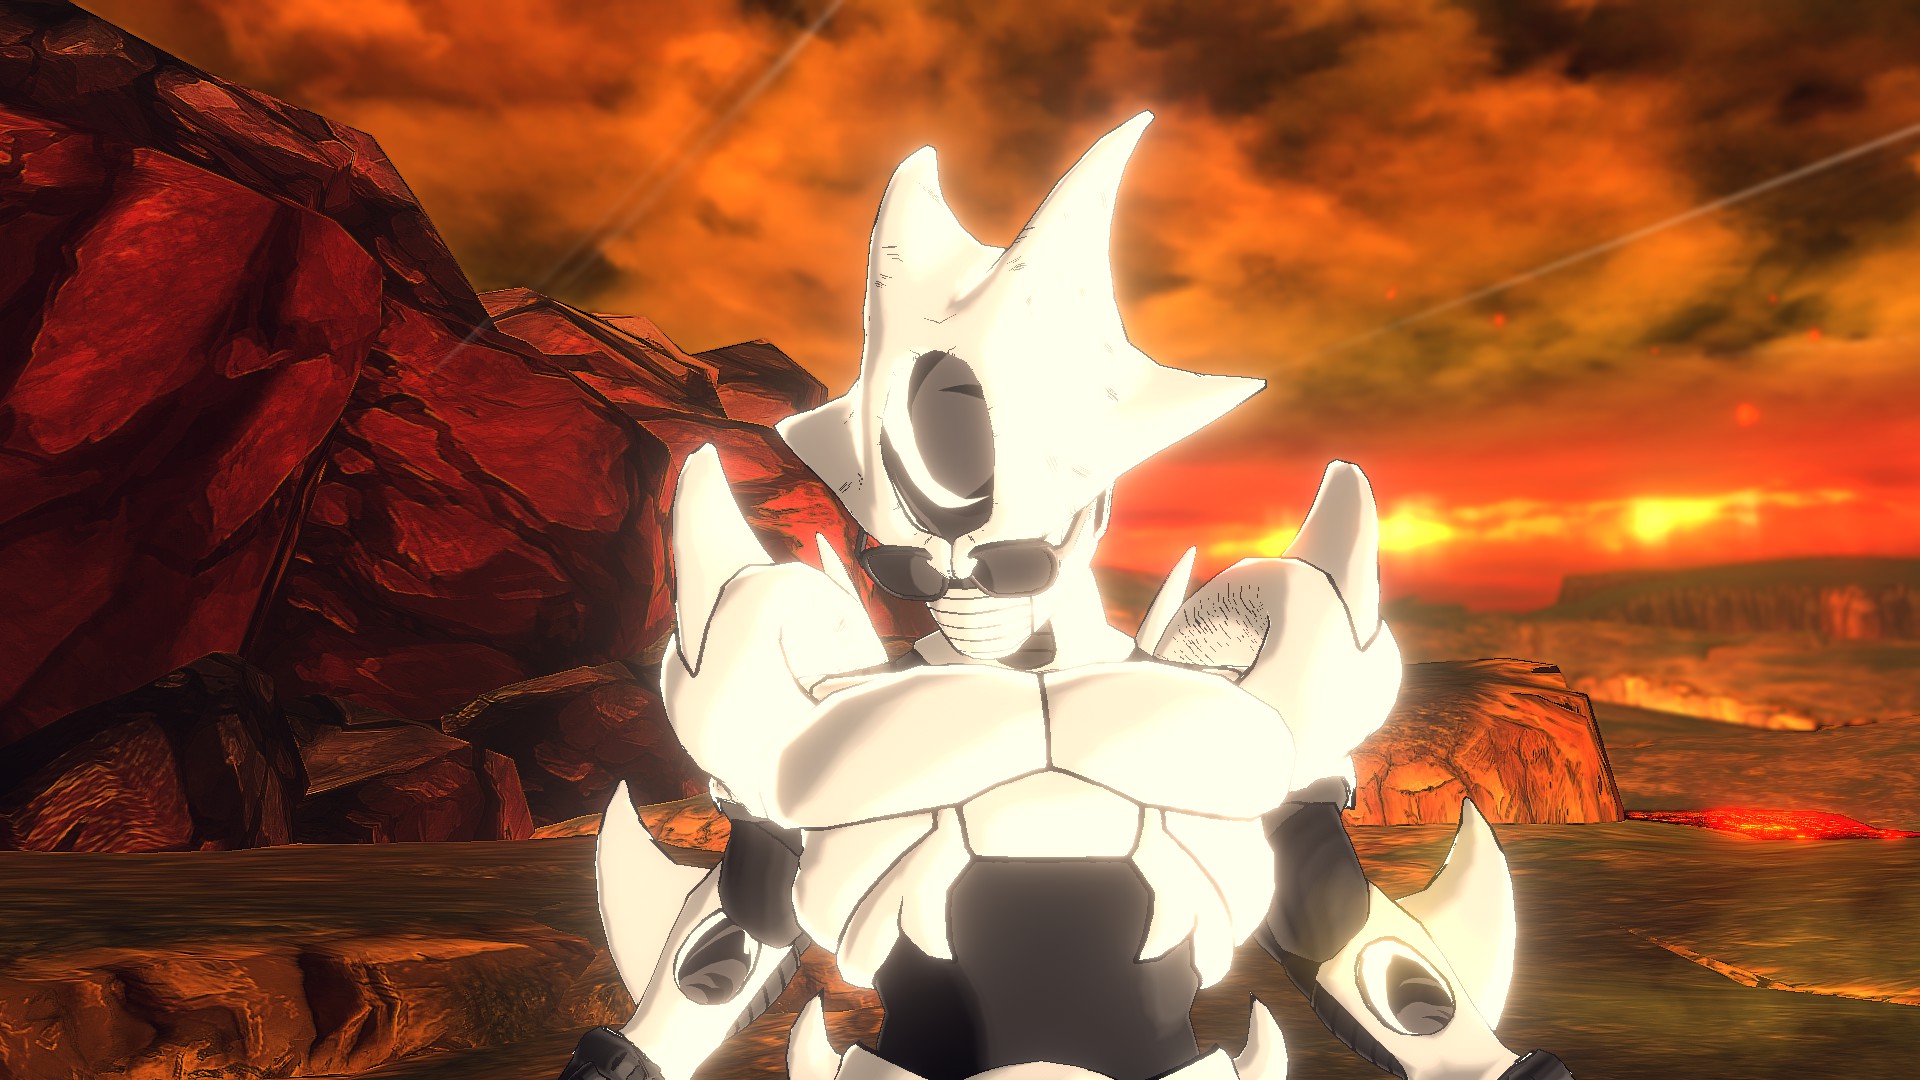 Steam Community :: Guide :: Parallel Quest's Time Patroller Locations in Dragon  Ball: Xenoverse